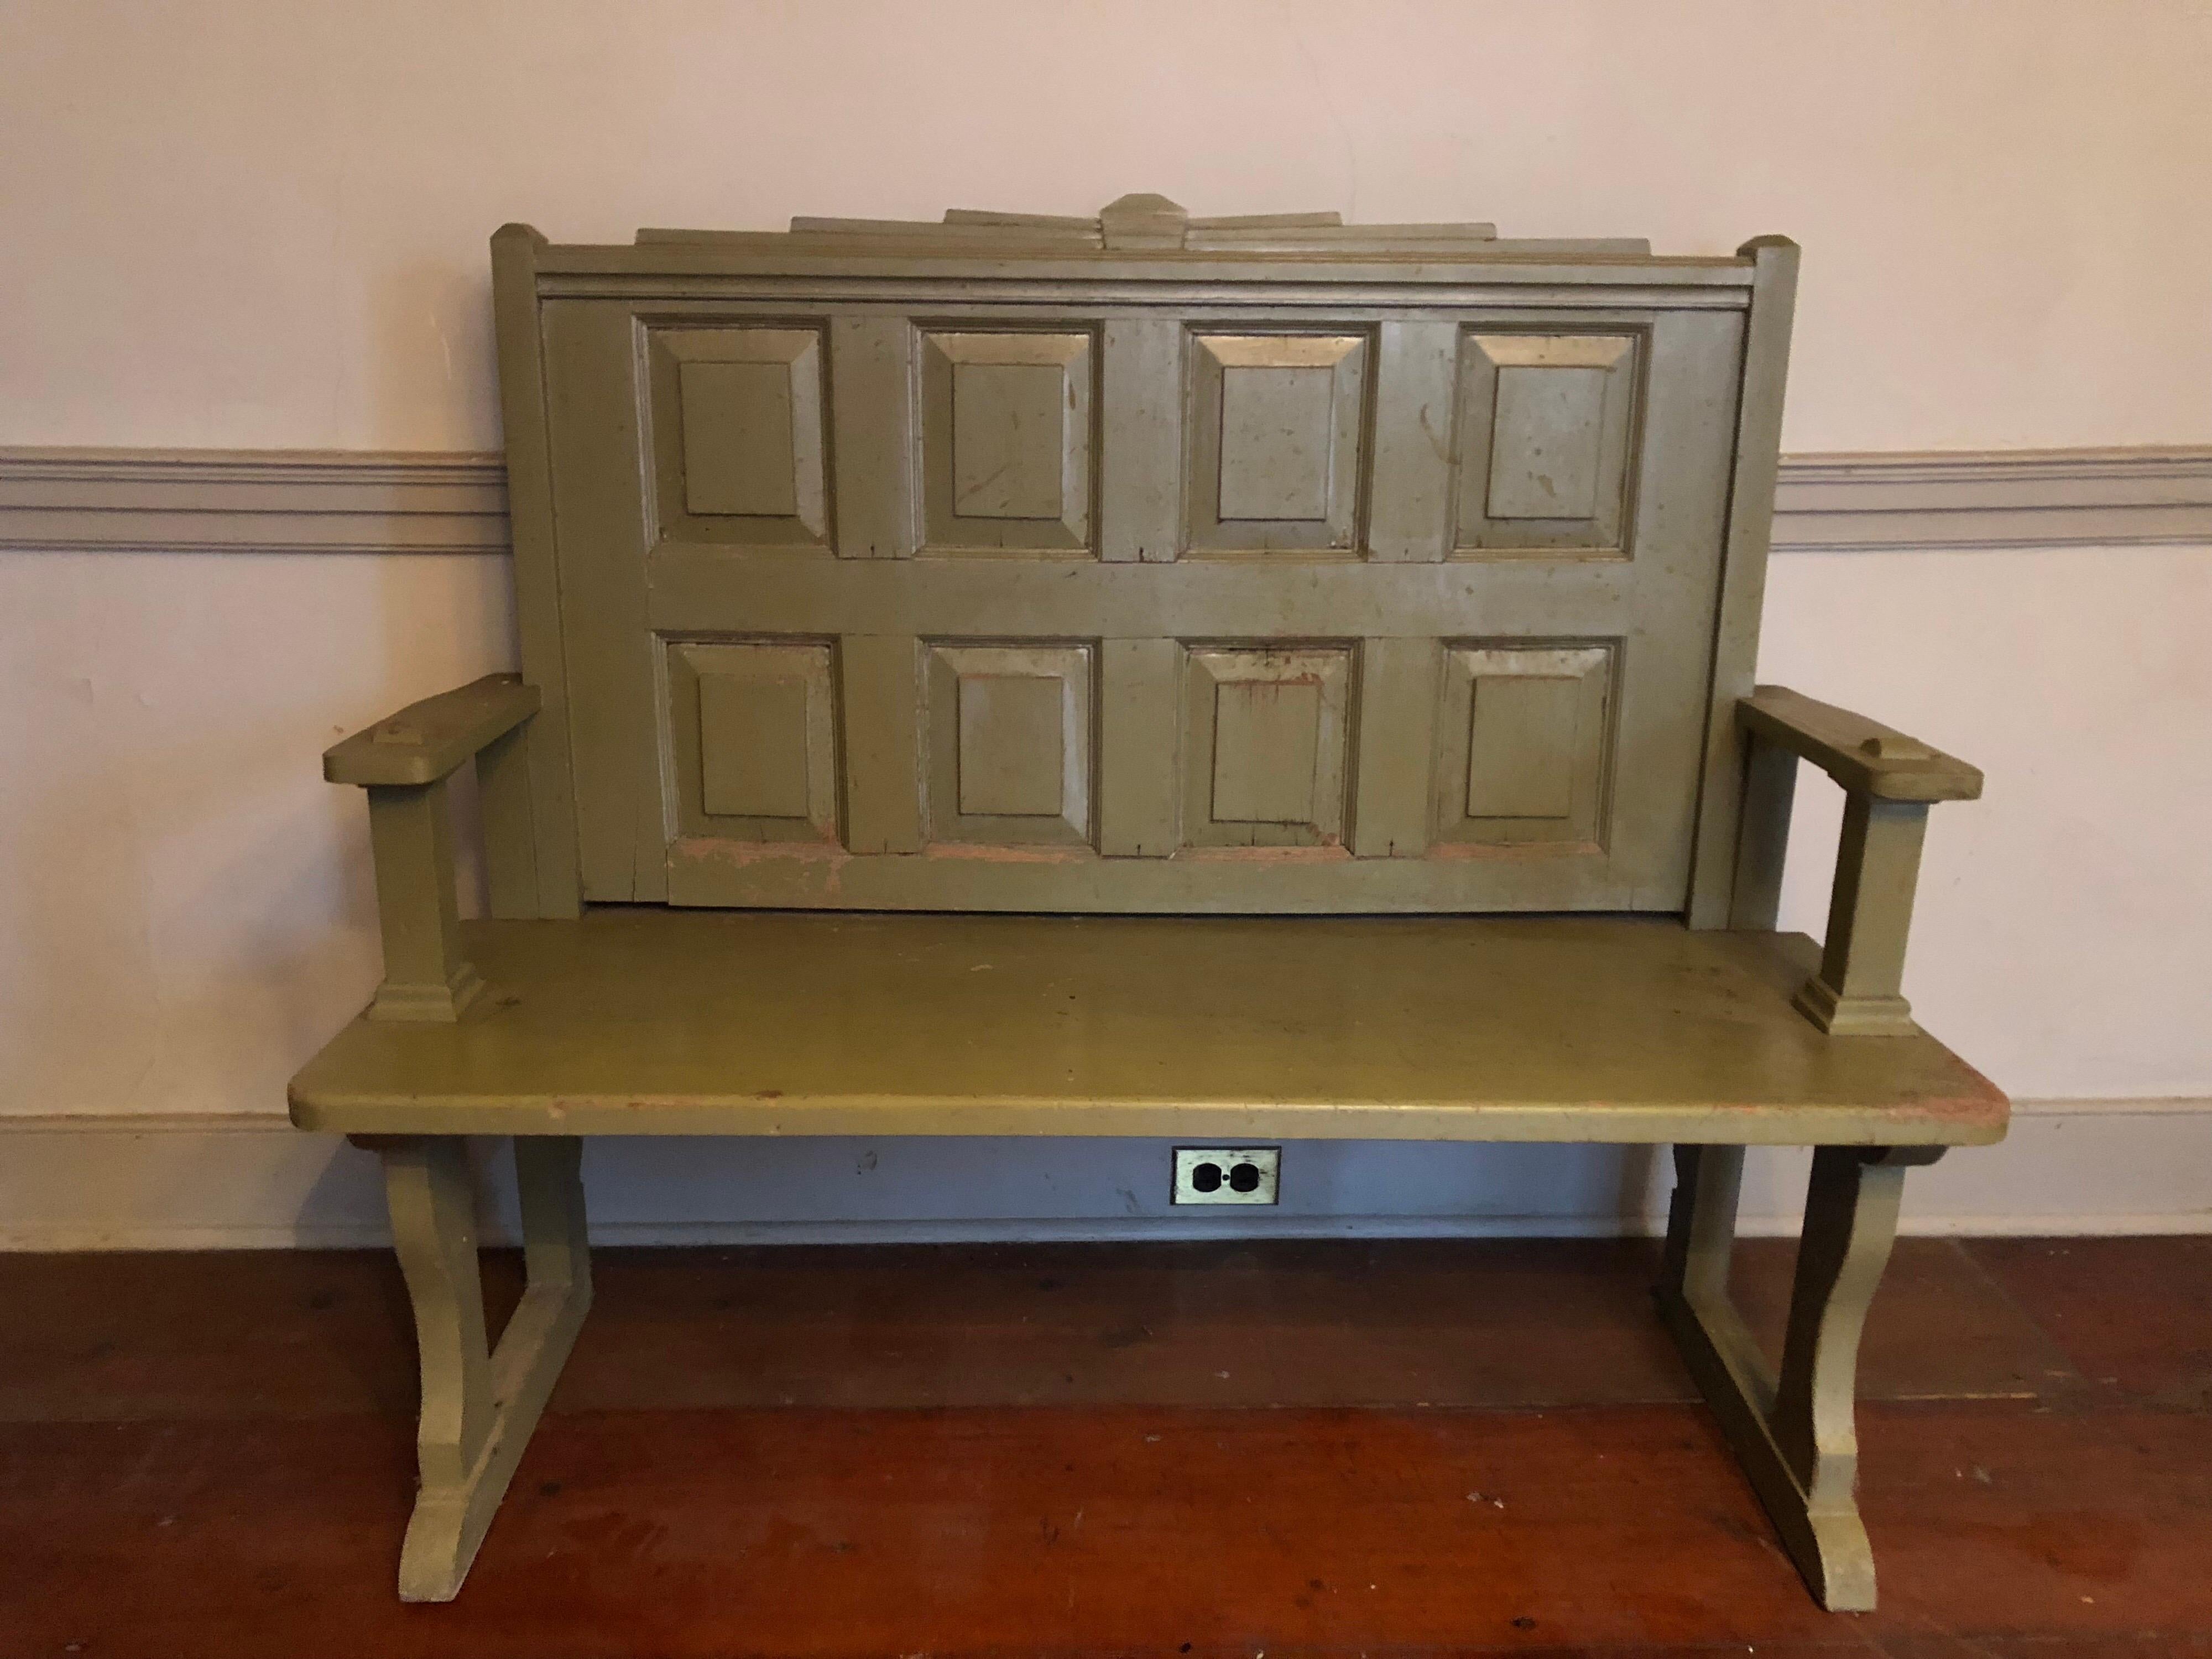 A pair of early 20th century American olive painted hall benches. Original untouched finish. Excellent and sturdy construction.